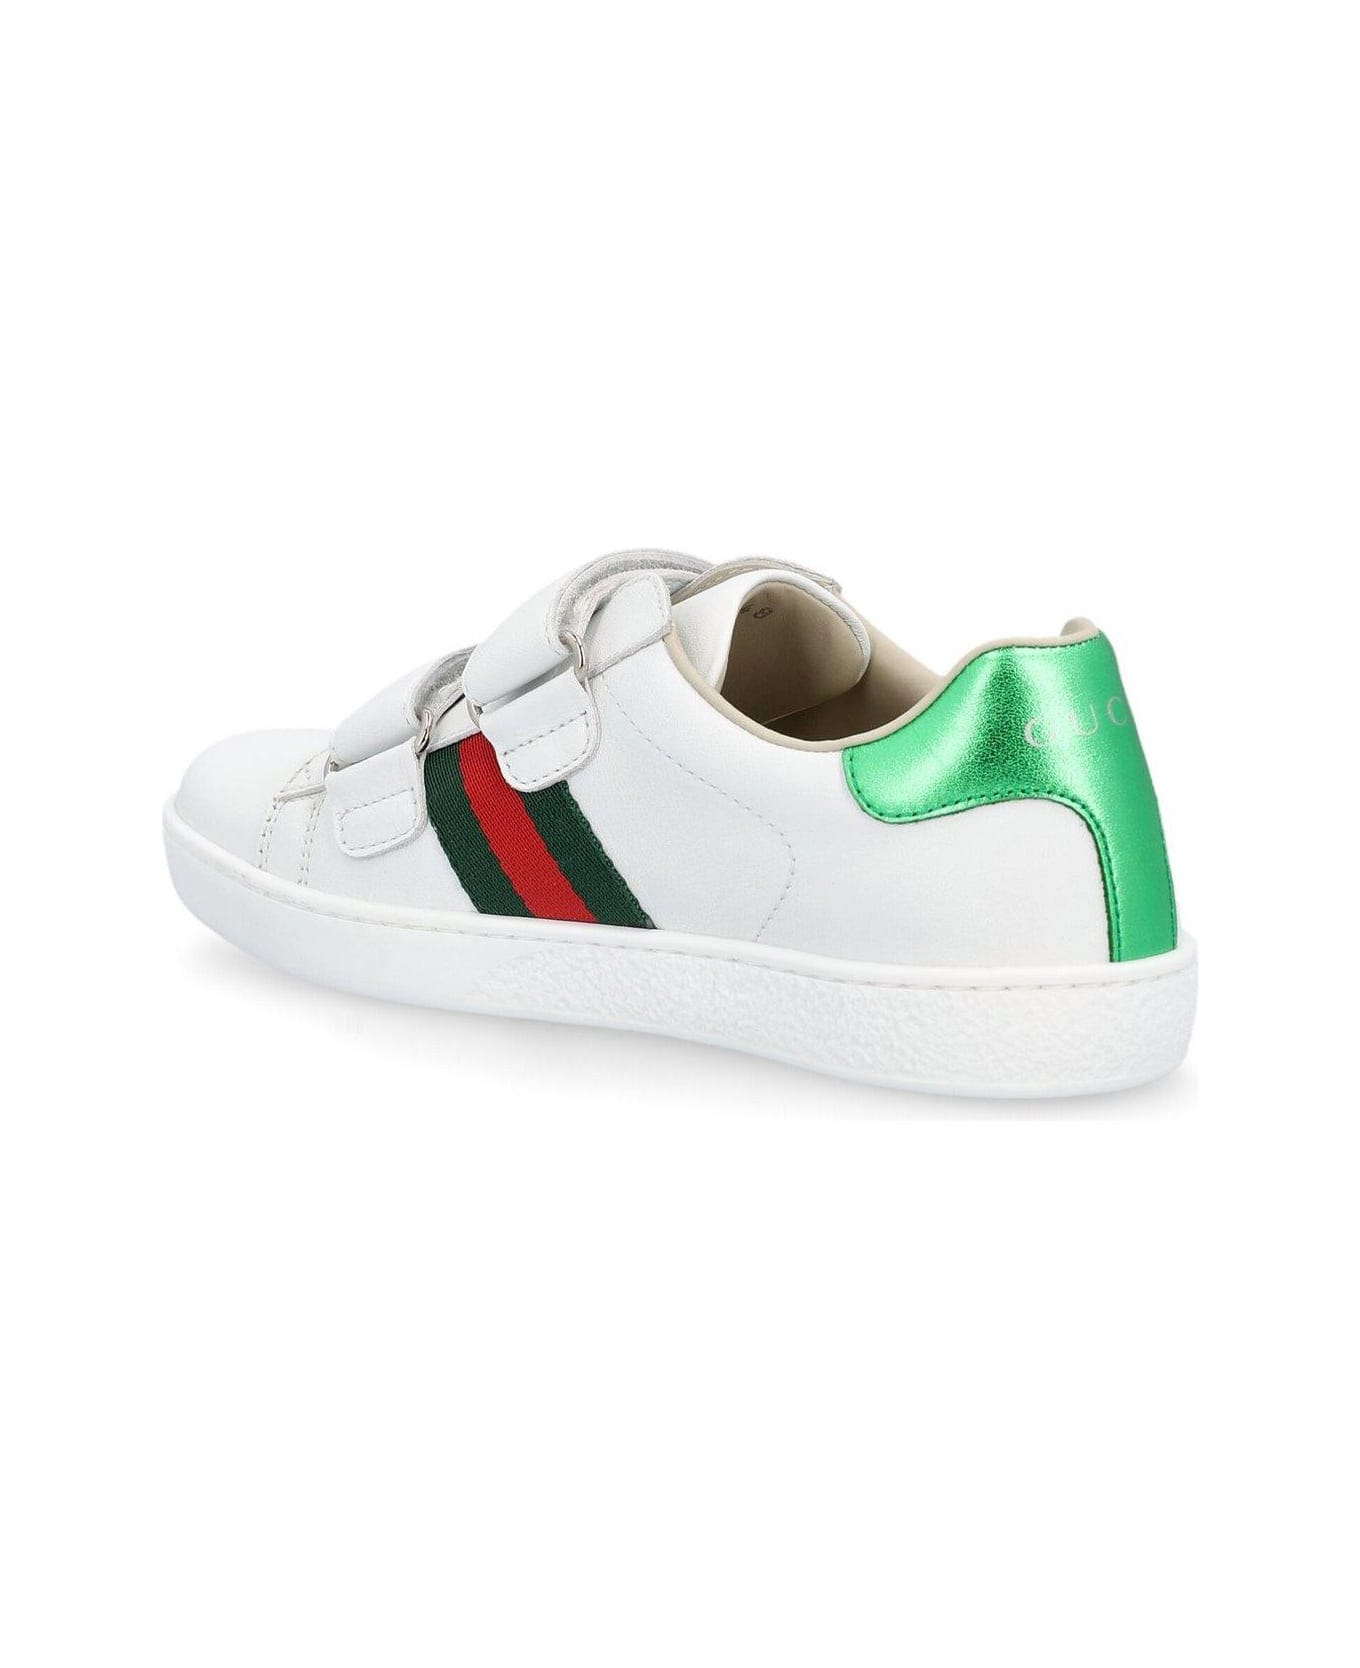 Gucci Ace Round Toe Sneakers